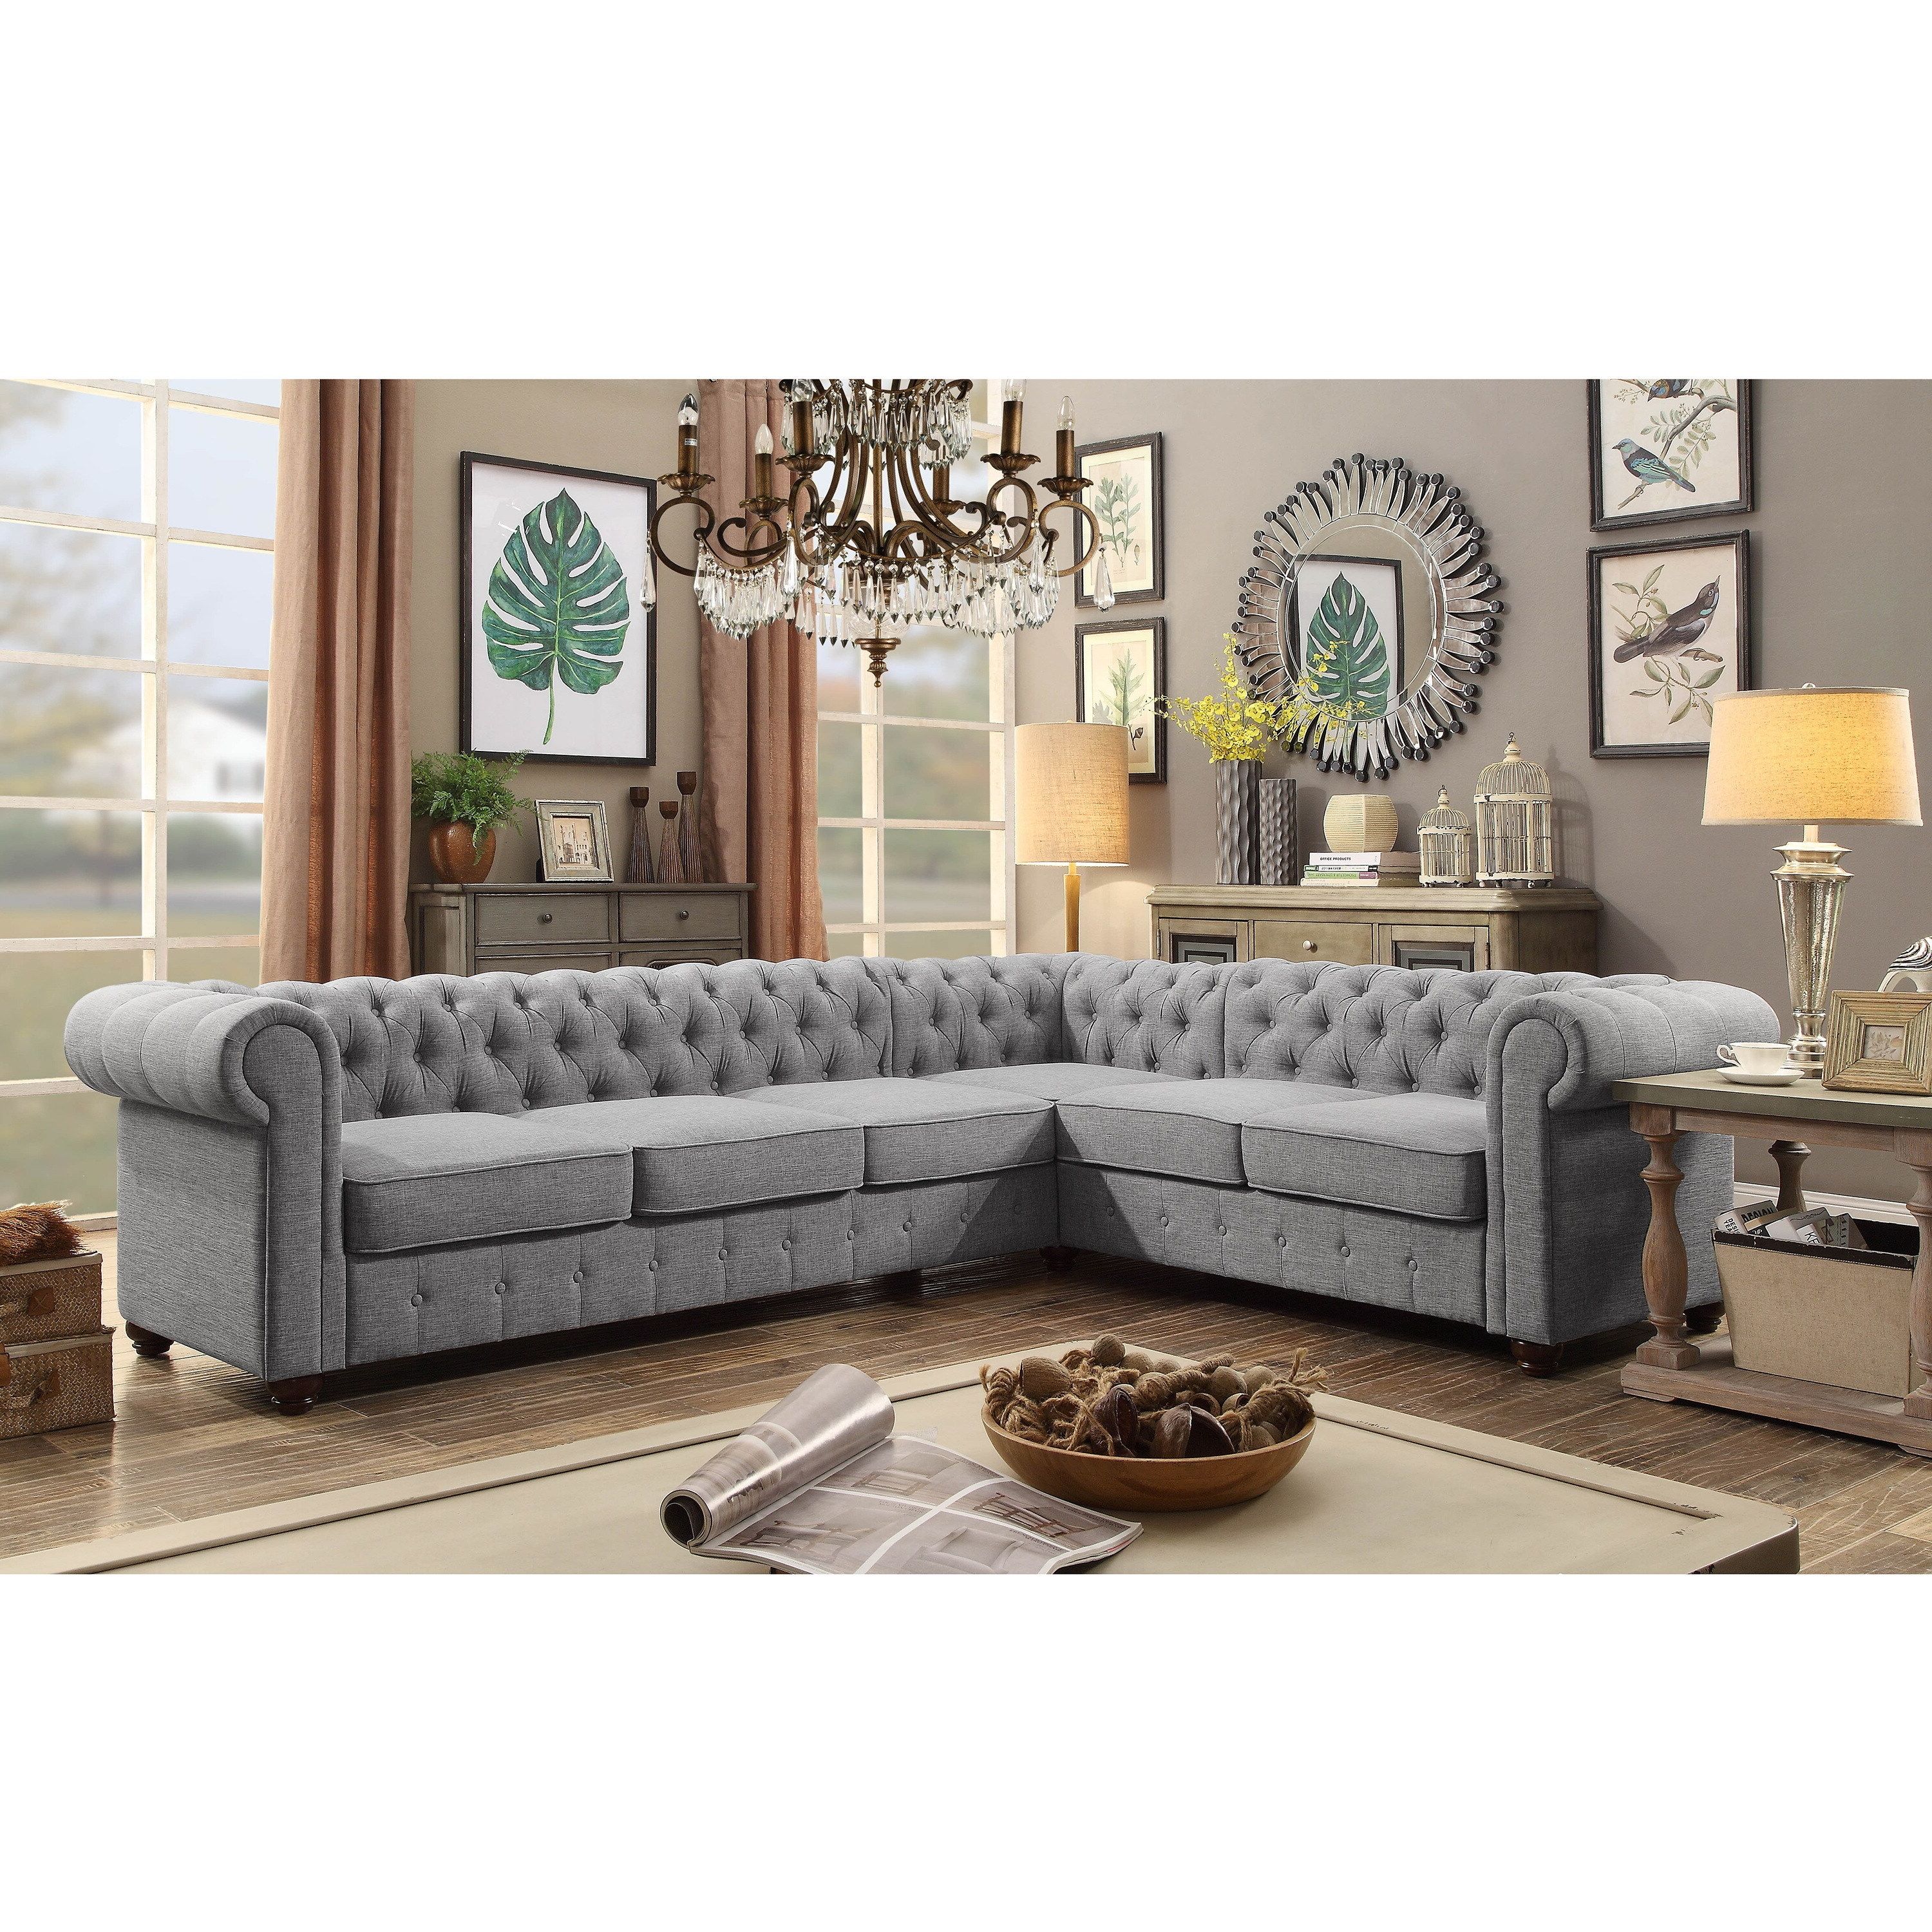 Moser Bay Garcia Furniture Linen 6 Seat Sectional Sofa Set – On Sale – –  12033154 Within 6 Seater Sectional Couches (View 10 of 20)